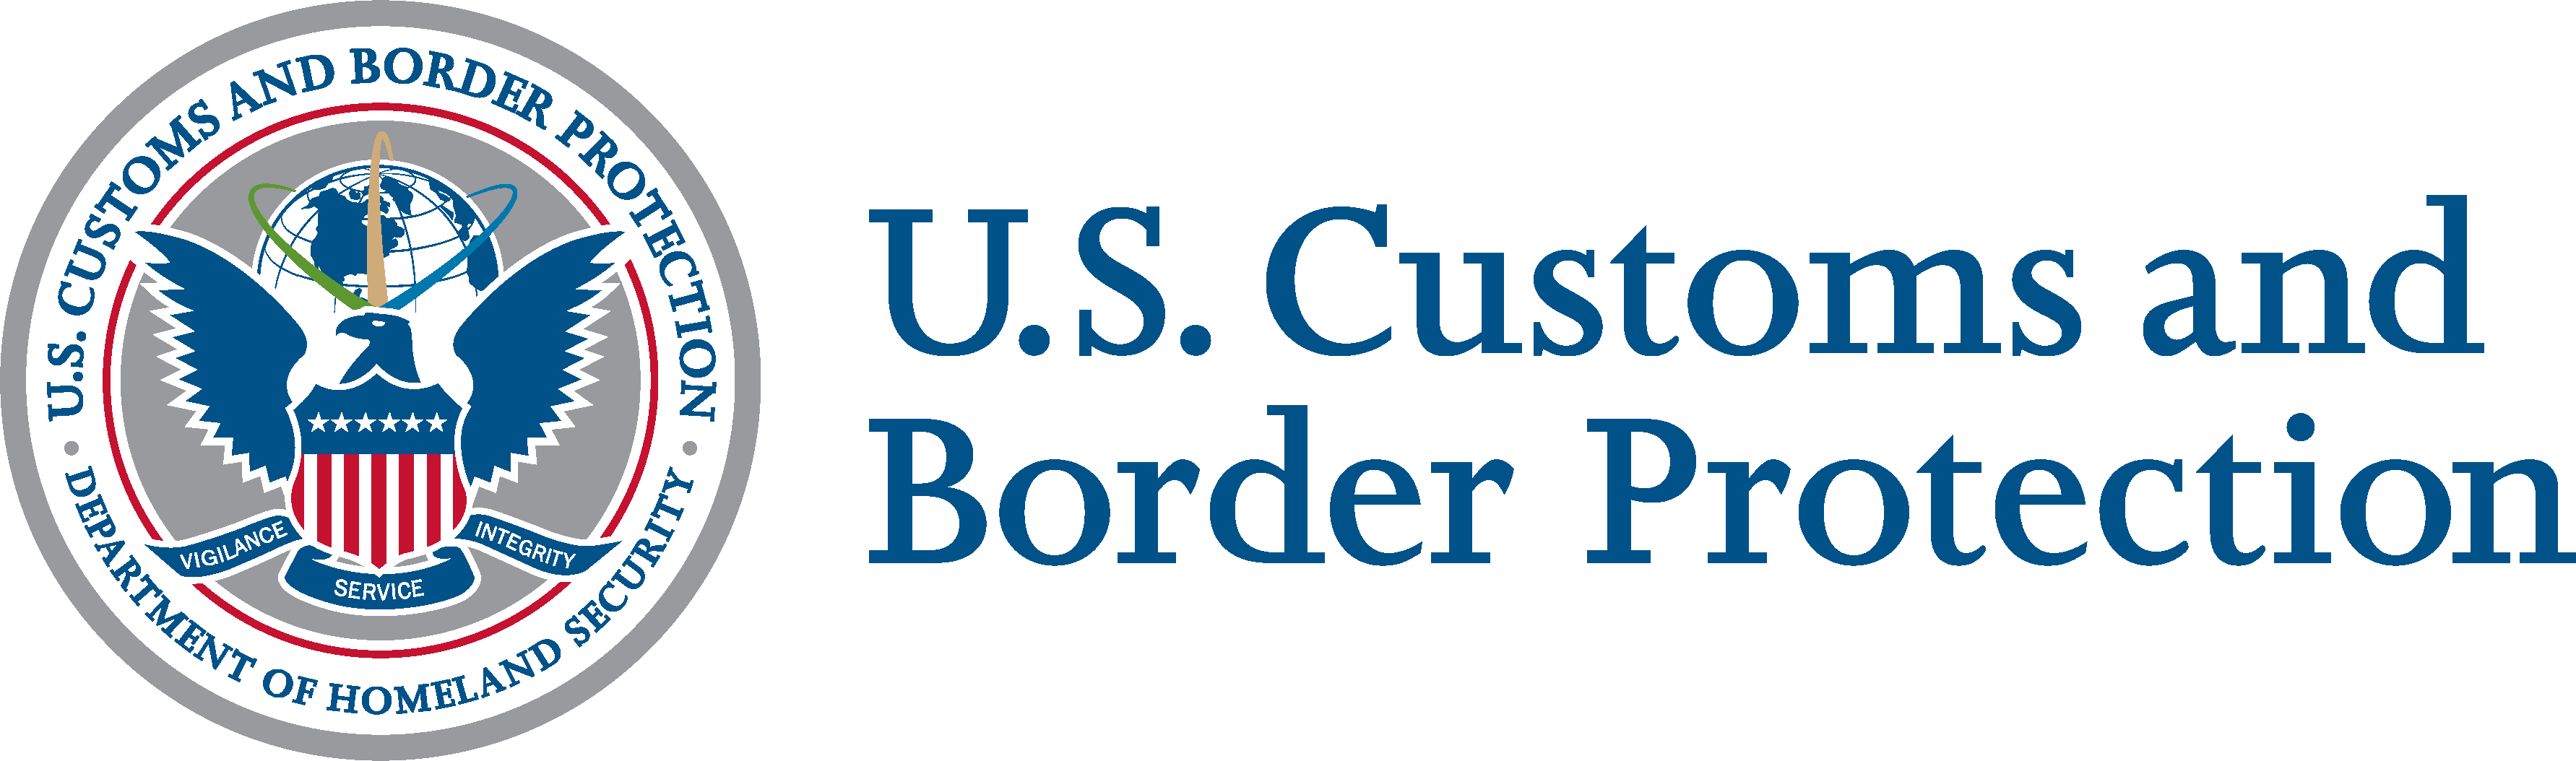 US Customs and Border Protection Seal